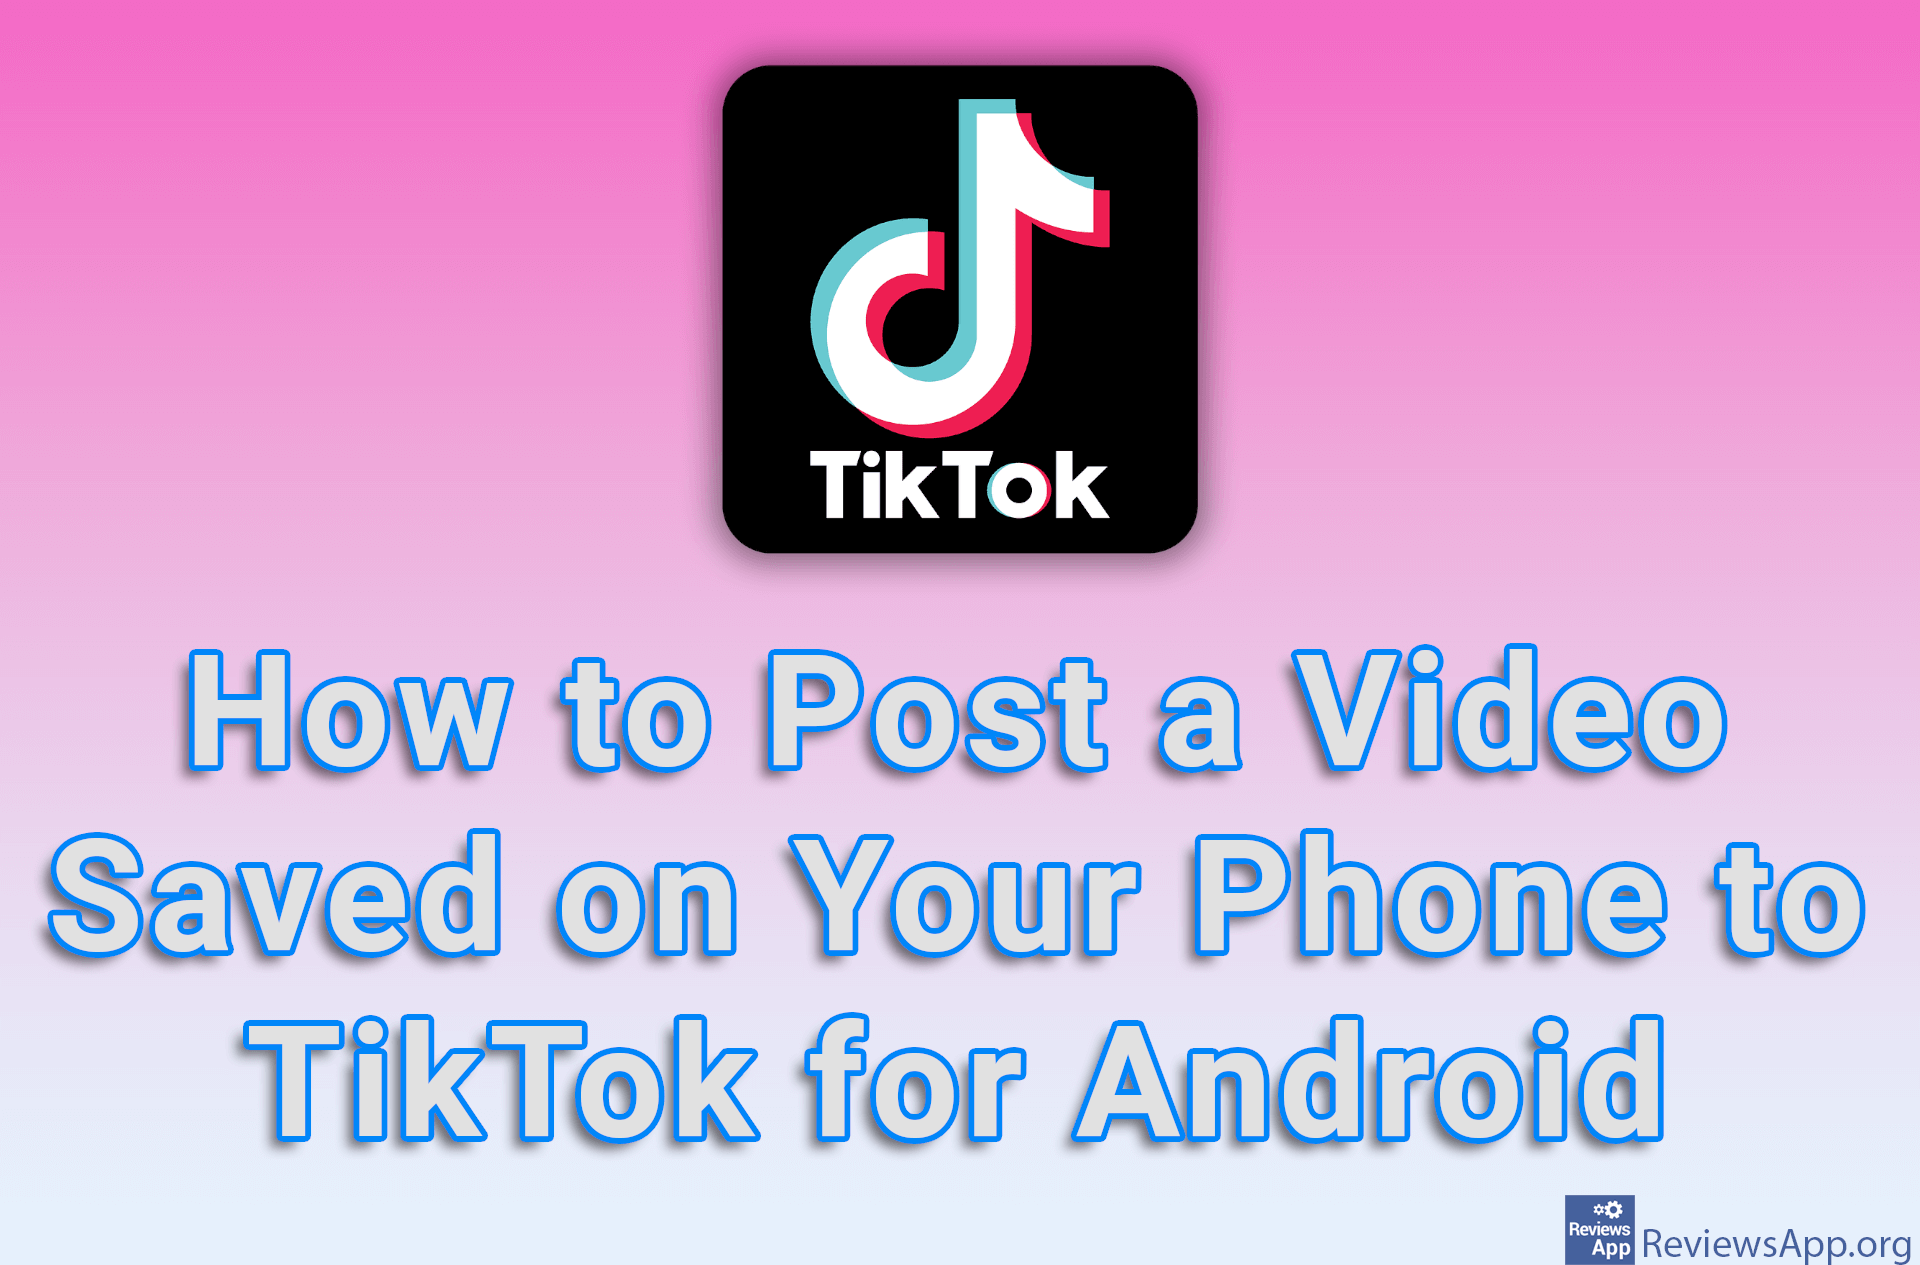 How to Post a Video Saved on Your Phone to TikTok for Android